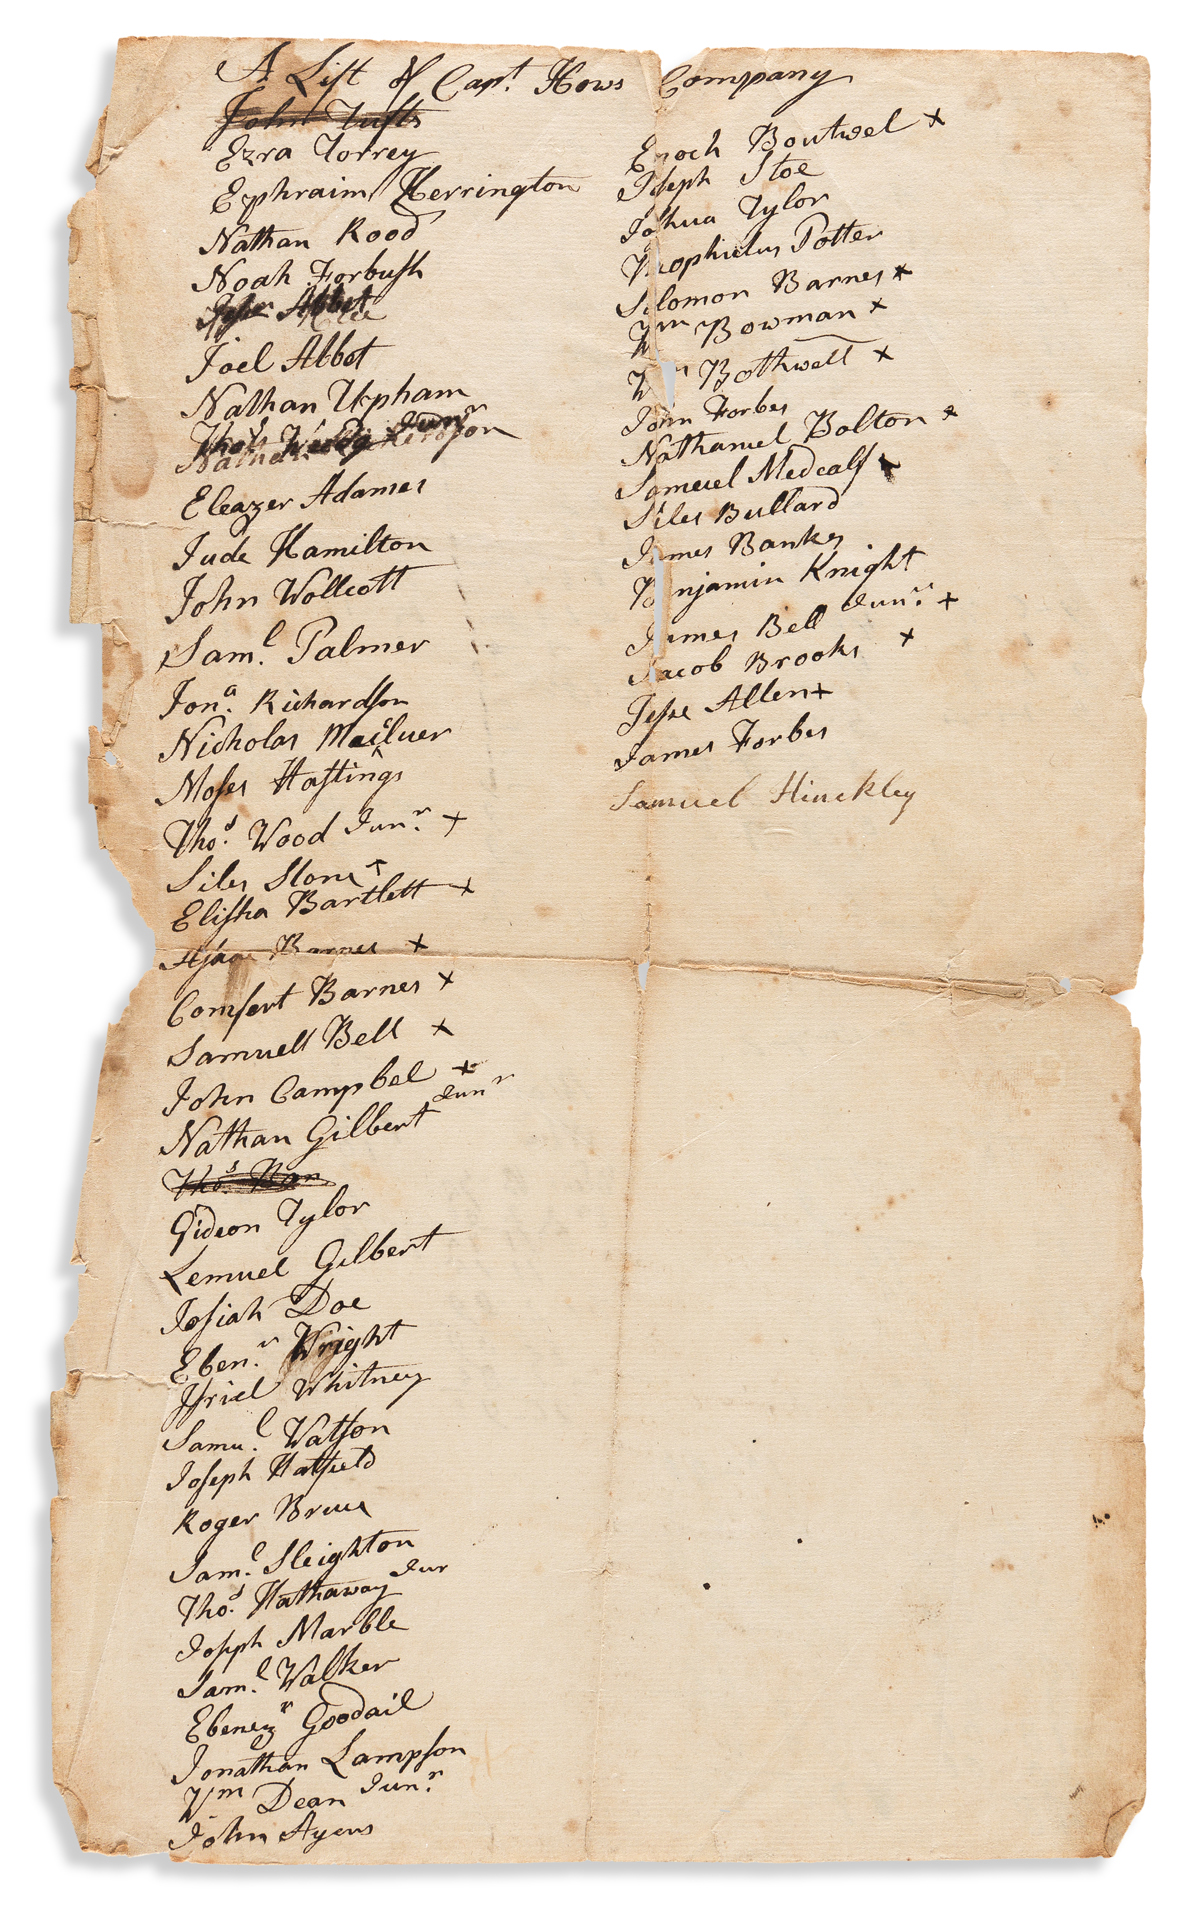 (AMERICAN REVOLUTION--1776.) Muster roll for Capt. Abner Hows company in the Continental Army.